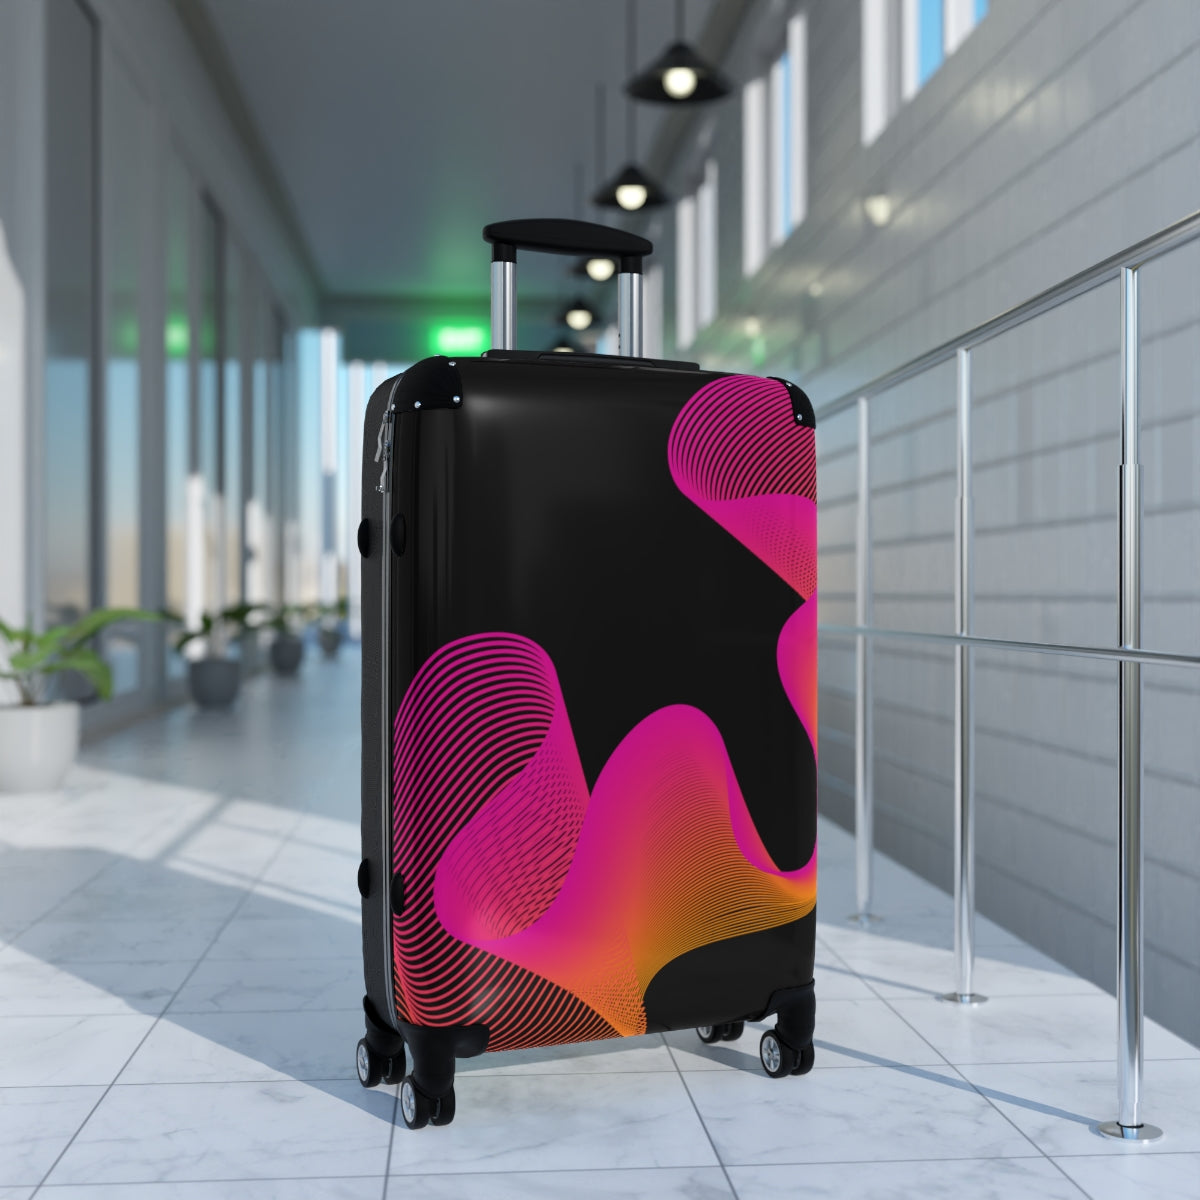 BEST CARRY-ON LUGGAGE BY ARTZIRA, CABIN SUITCASE AND CHECKIN LUGGAGE, PINK ARTISTIC DESIGNS FOR GIRLS, WOMEN, ARTISTS, DOUBLE WHEELED SPINNER